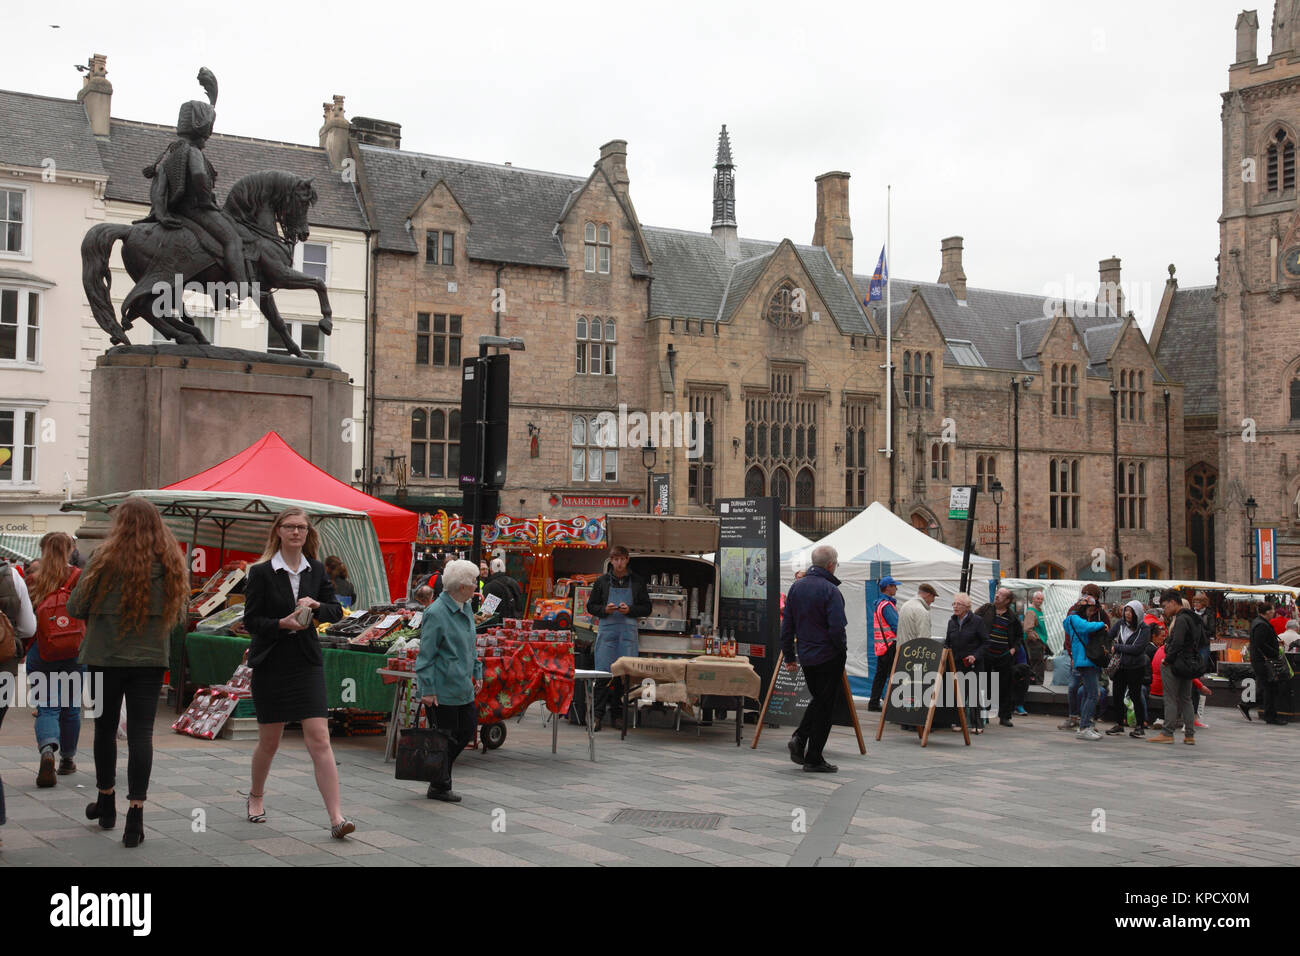 The outdoor Saturday market in Market Place, Durham, busy with shoppers Stock Photo